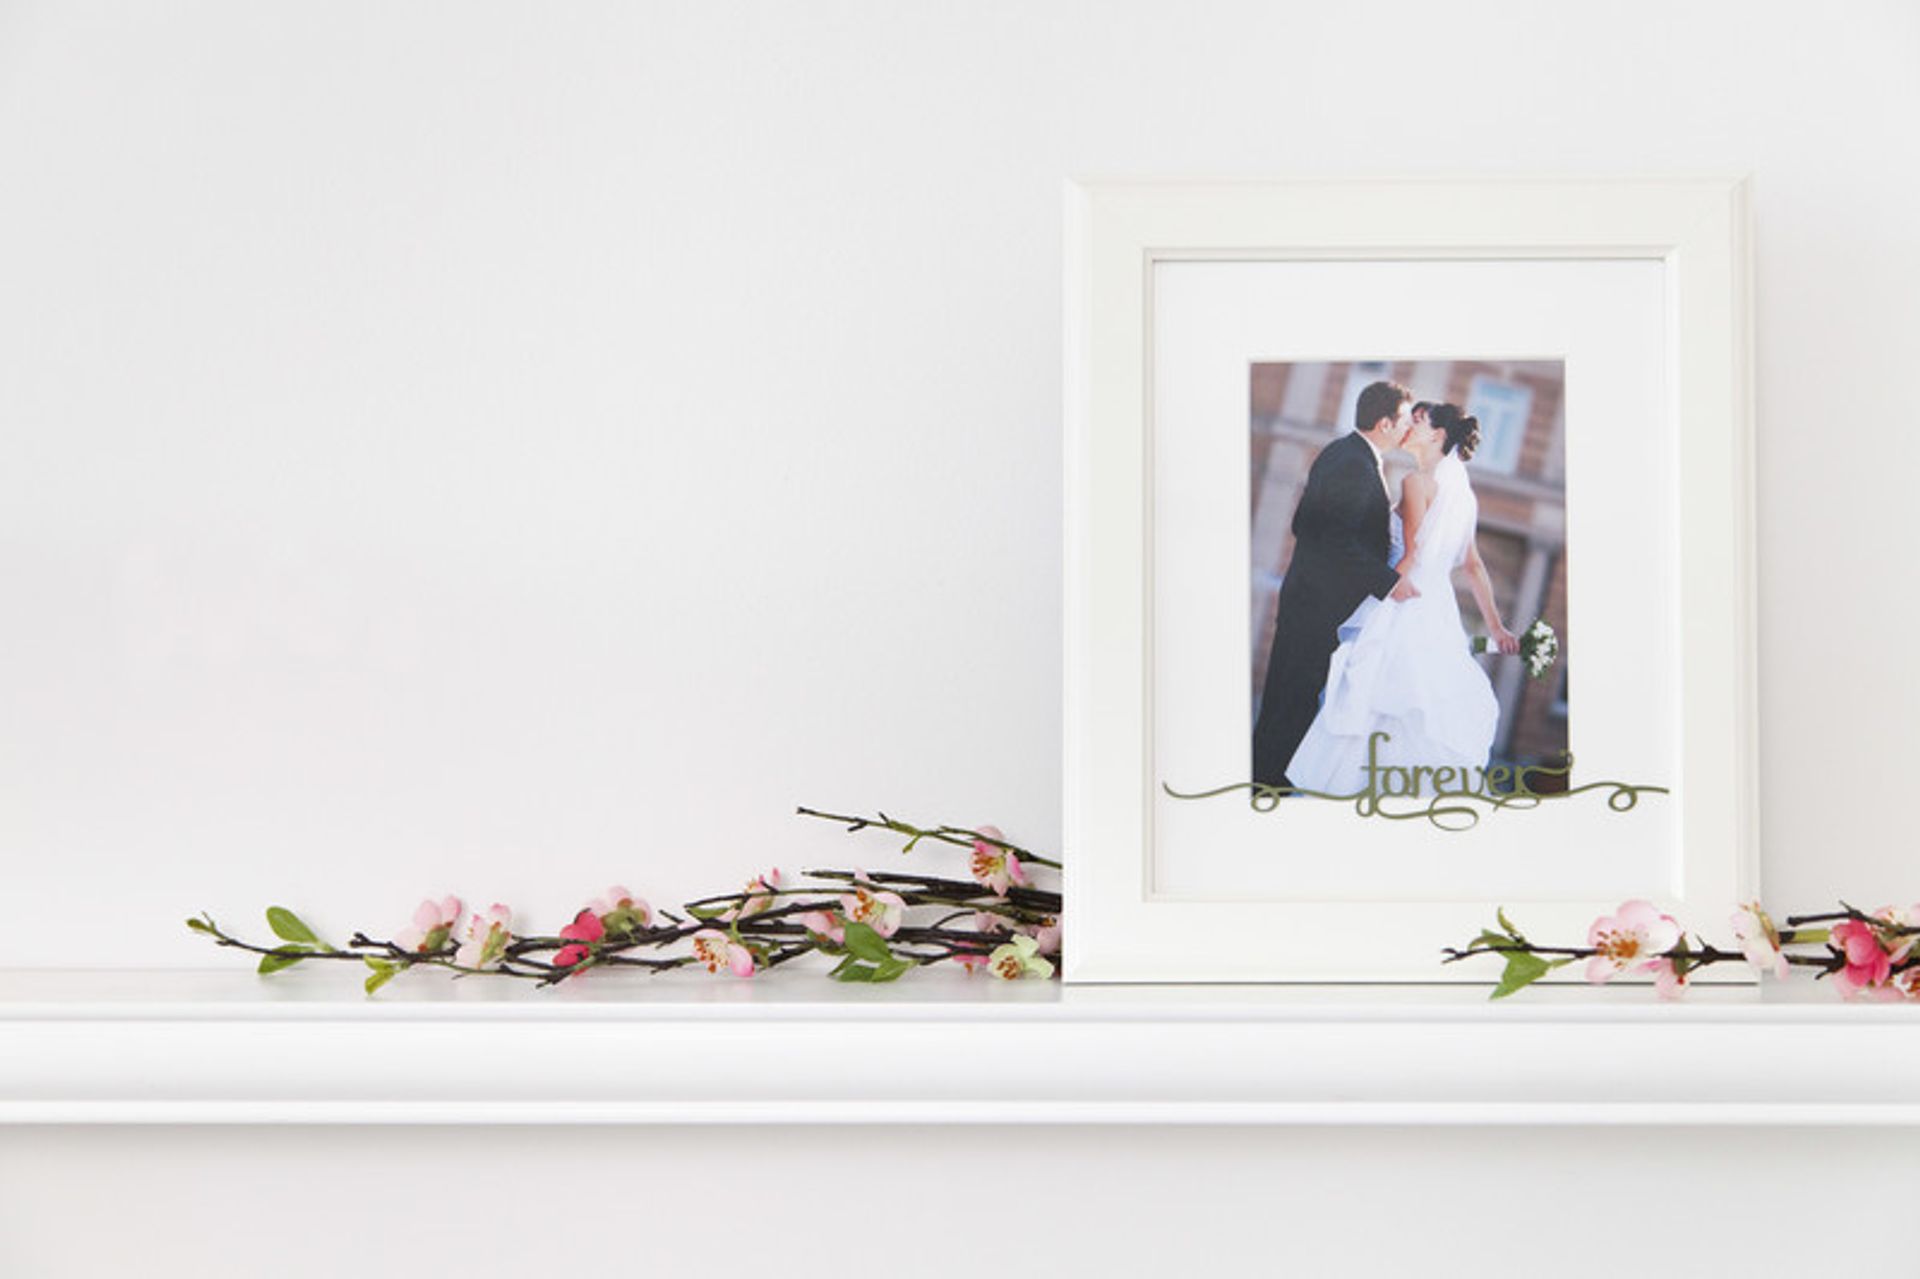 Framed picture of a bride and groom with the word Forever on the front of the frame